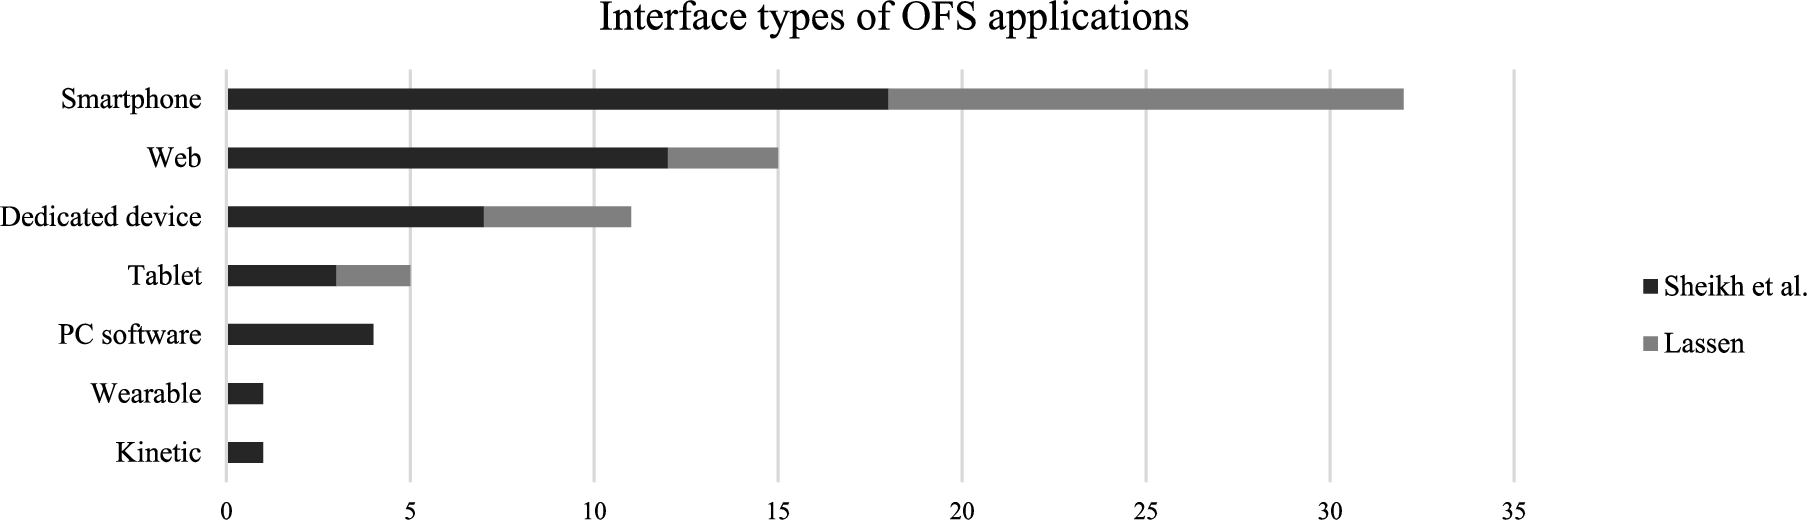 Interface types of OFS applications in Sheik et al. and Lassen.